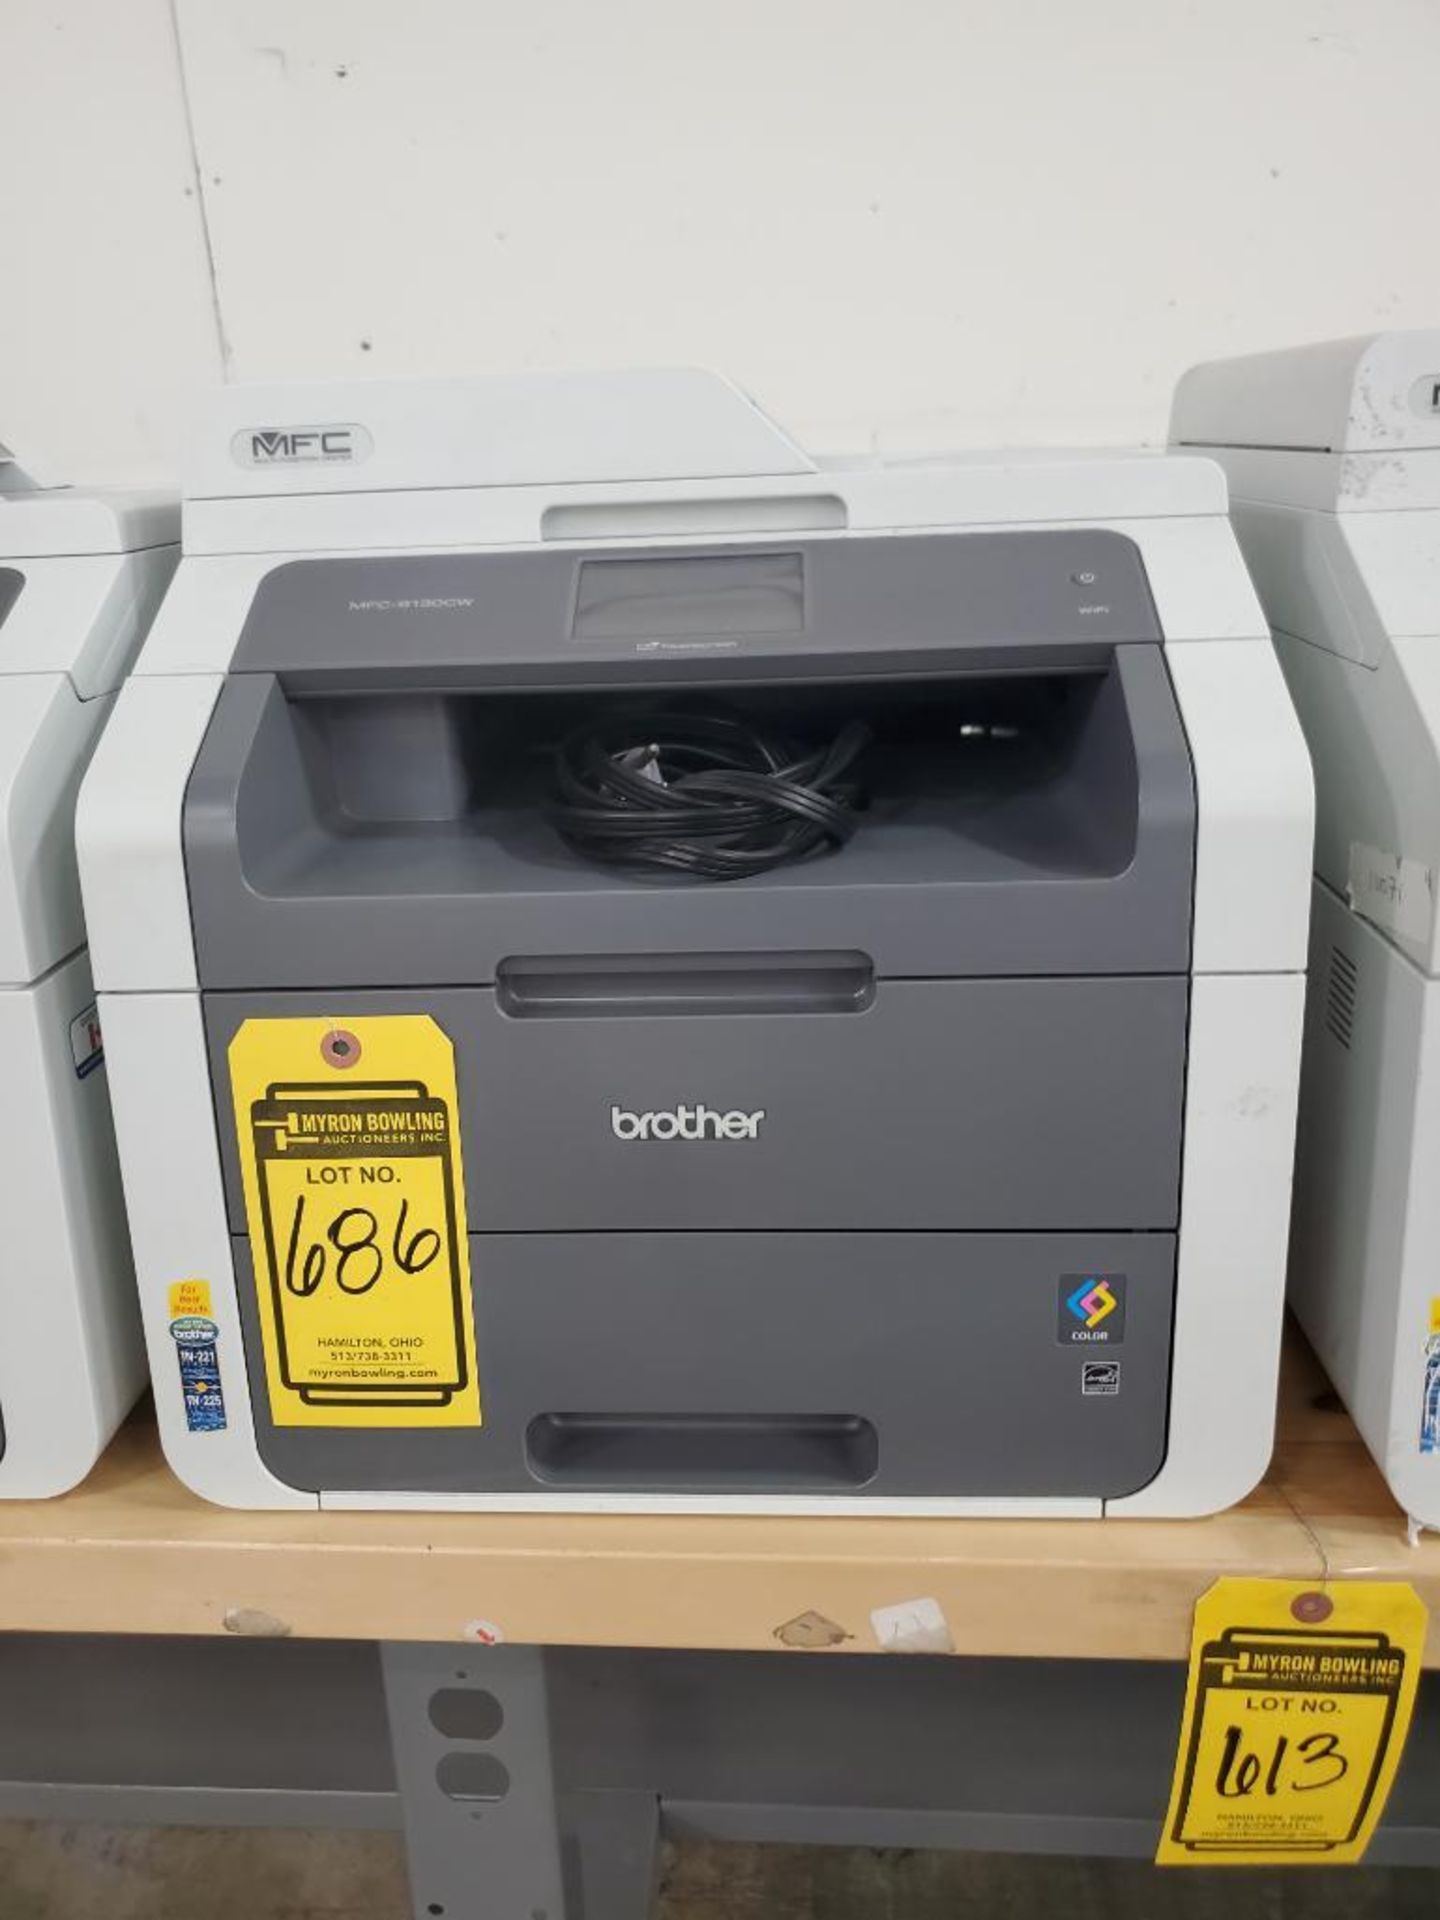 BROTHERS MULTI-FUNCTION CENTER PRINTER; MODEL MFC-9130CW